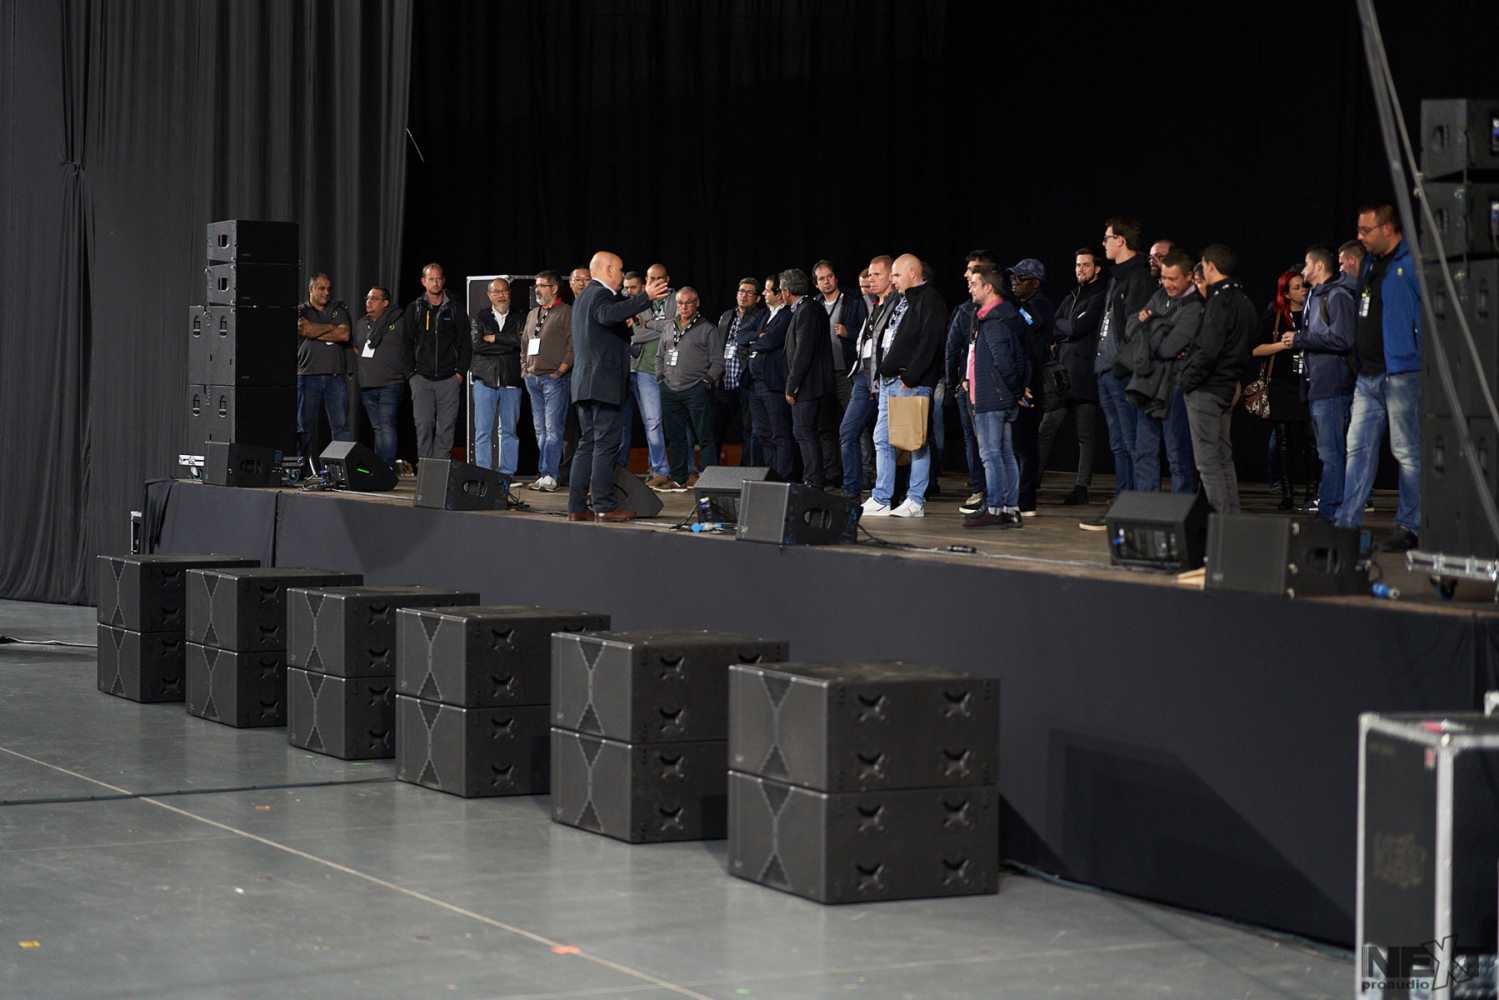 Seventy international distribution partners, dealers, customers and designers took part